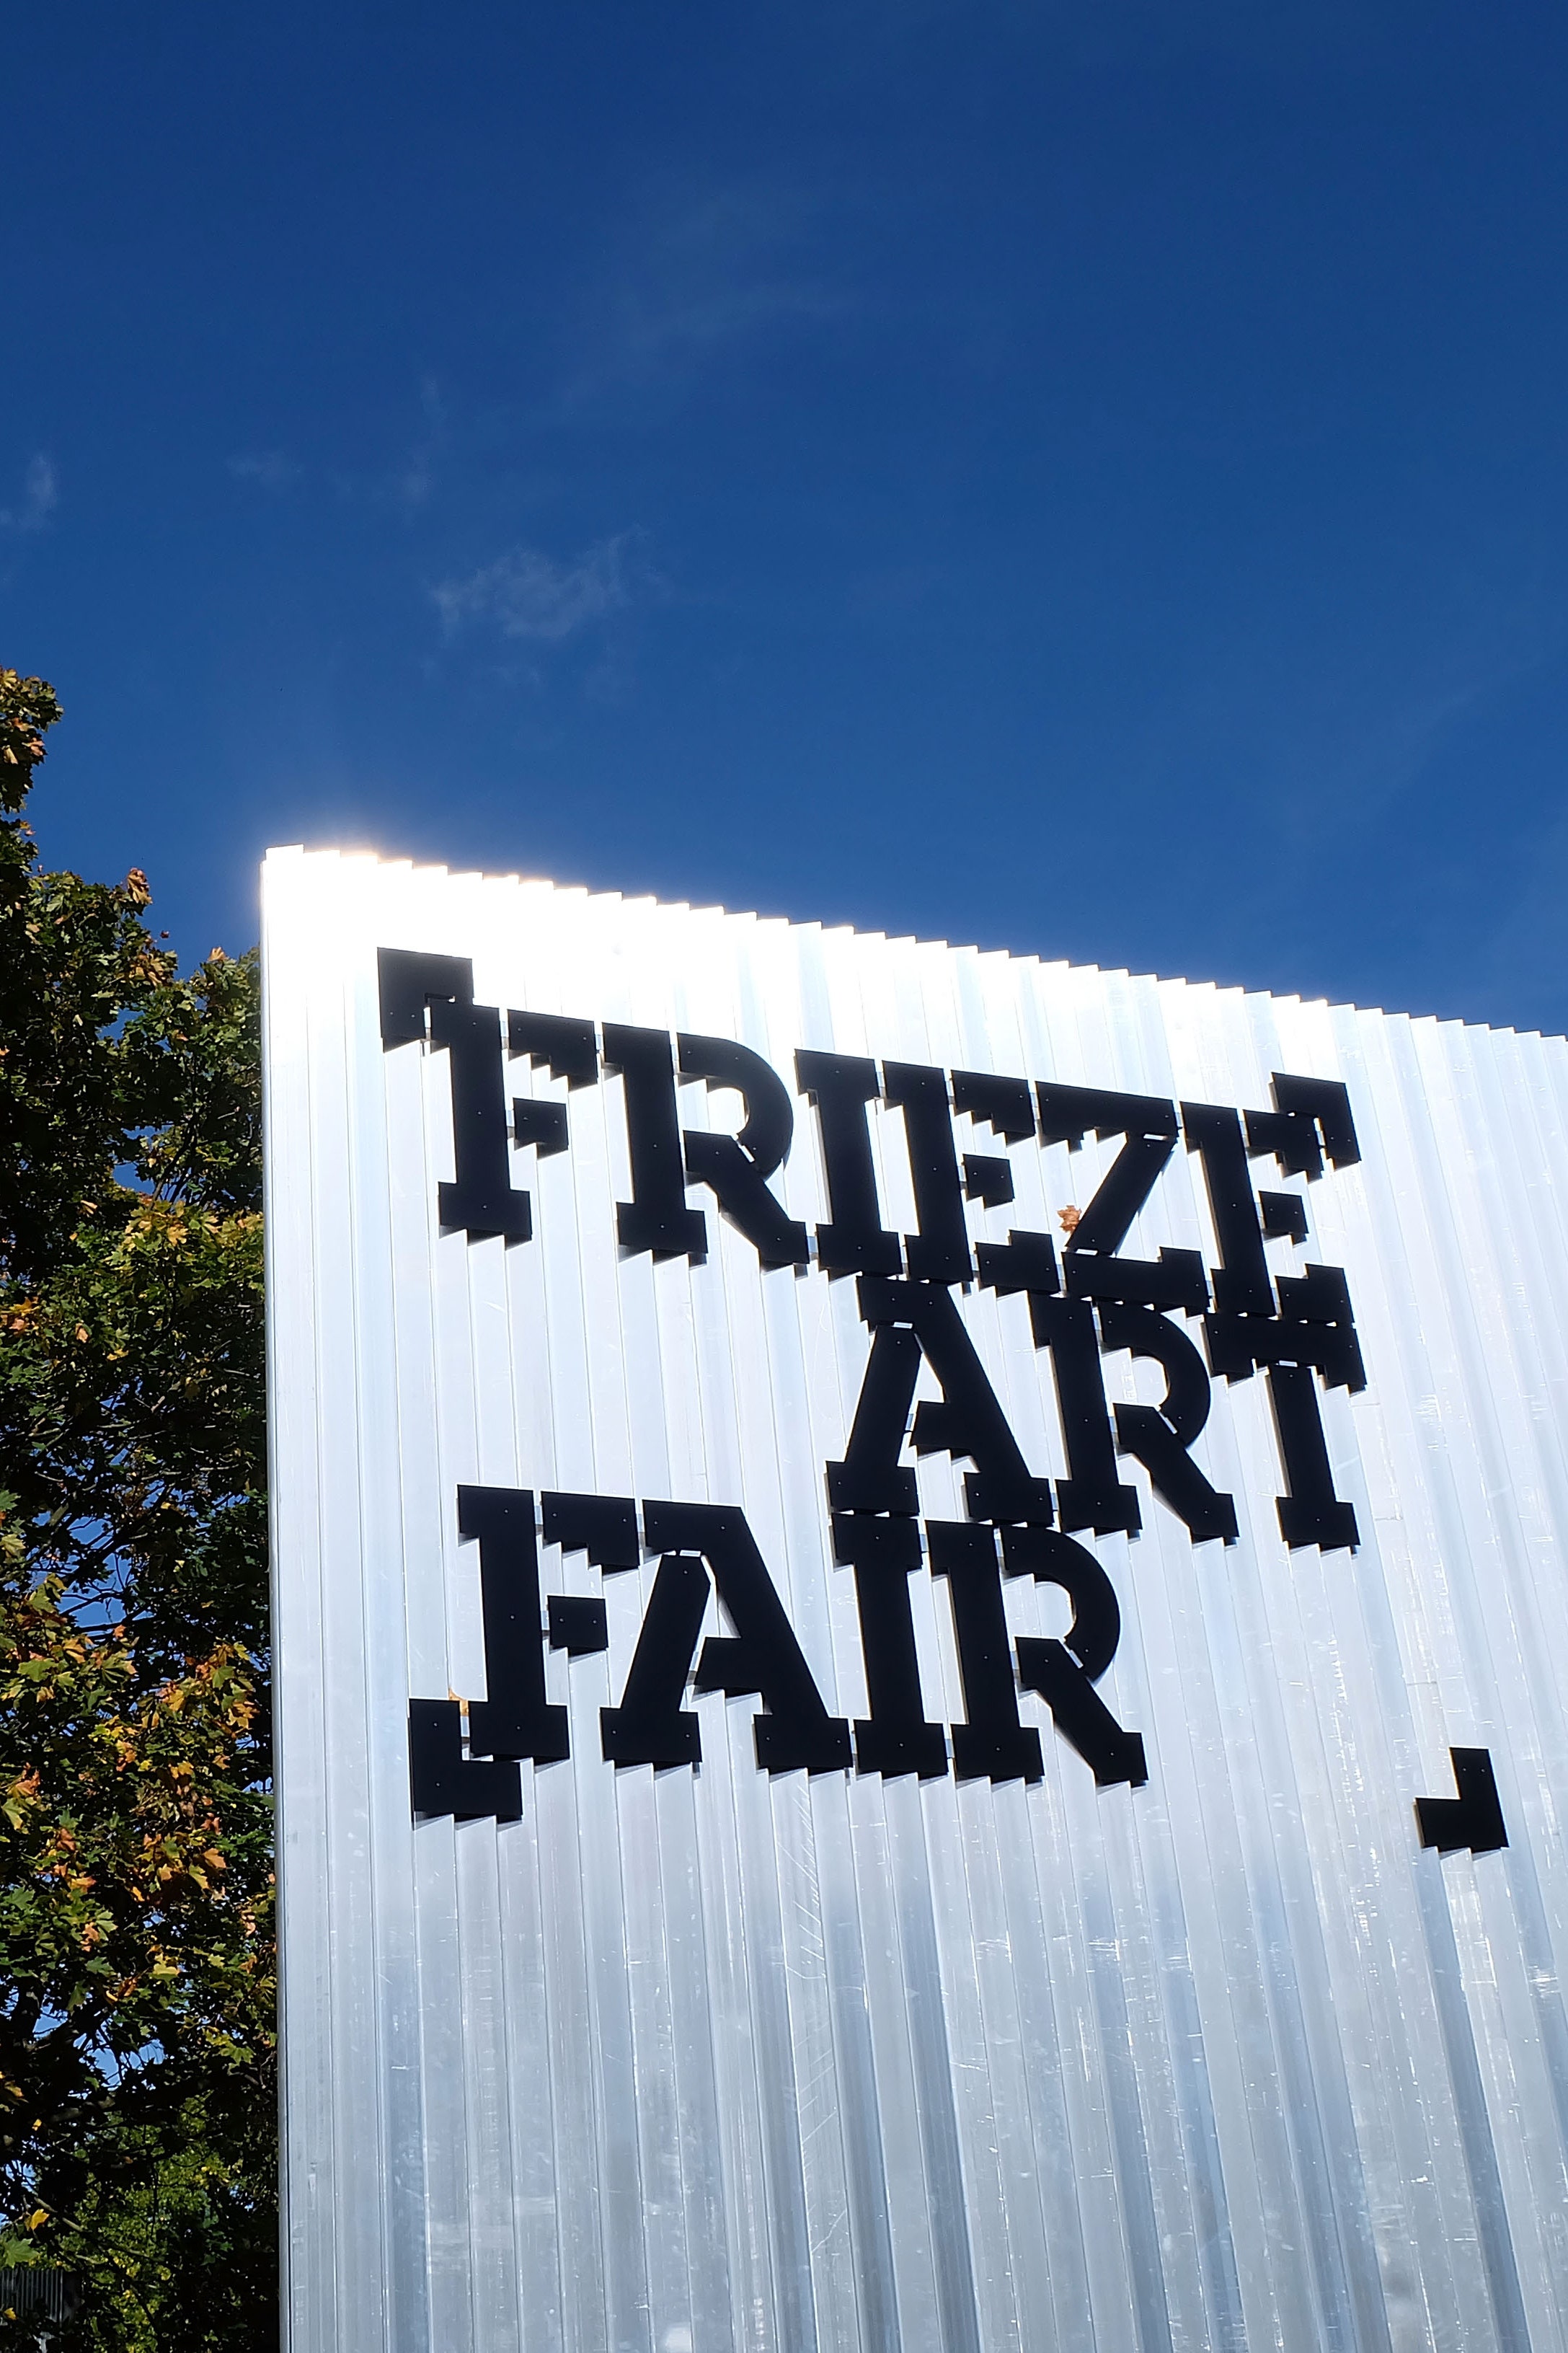 Signage at the entrance to the Frieze Art Fair in Regents Park on October 6 2017 in London.